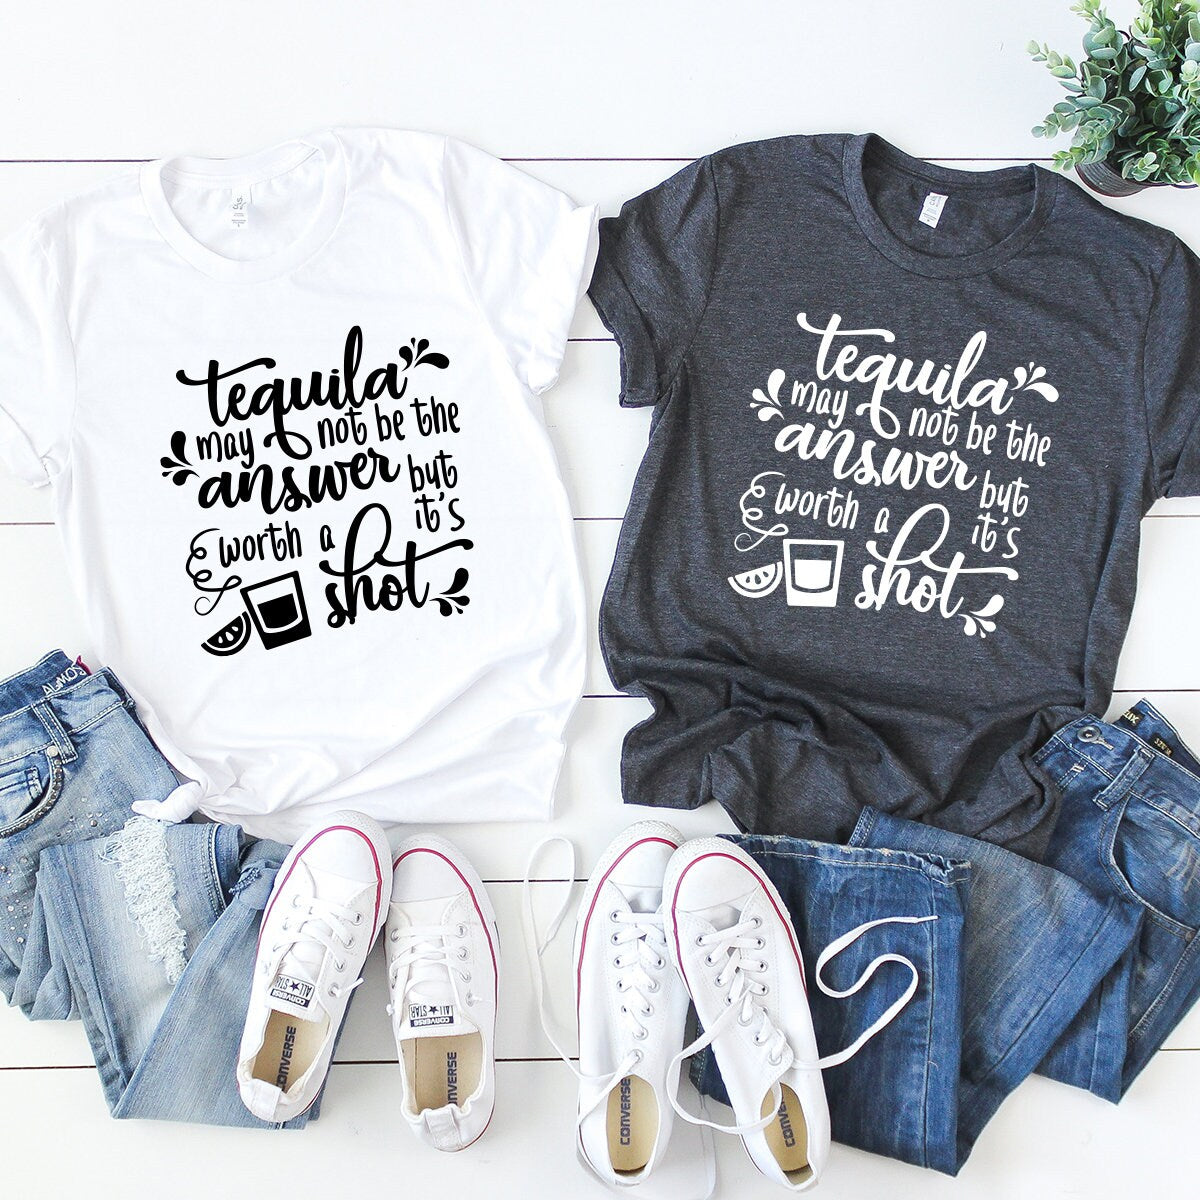 Tequila Shirt, Drinking Shirts, Margarita Shirt, Drinking Friends Gift, Funny Drinking Shirts, Tequila Party Shirt, Tacos And Tequila Tee - Fastdeliverytees.com